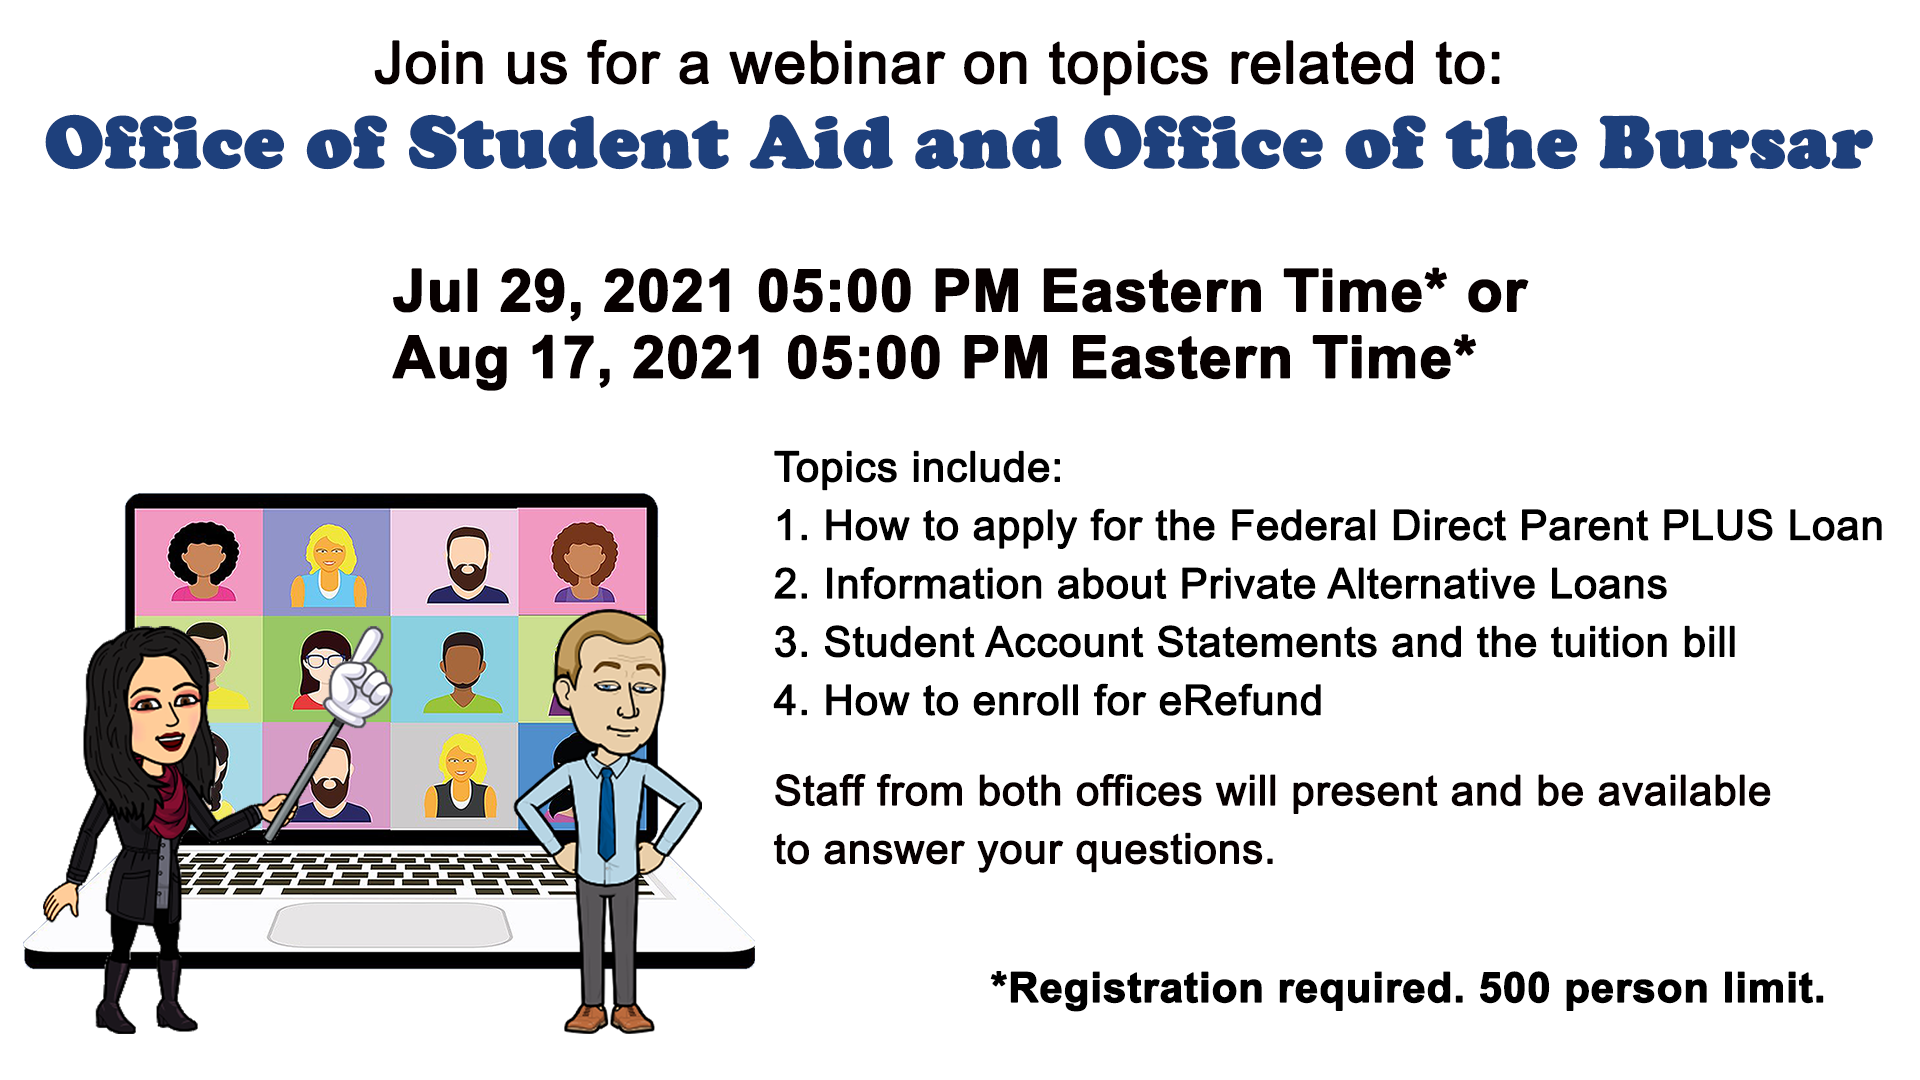 Office of Student Aid and Office of the Bursar Webinar for New Students